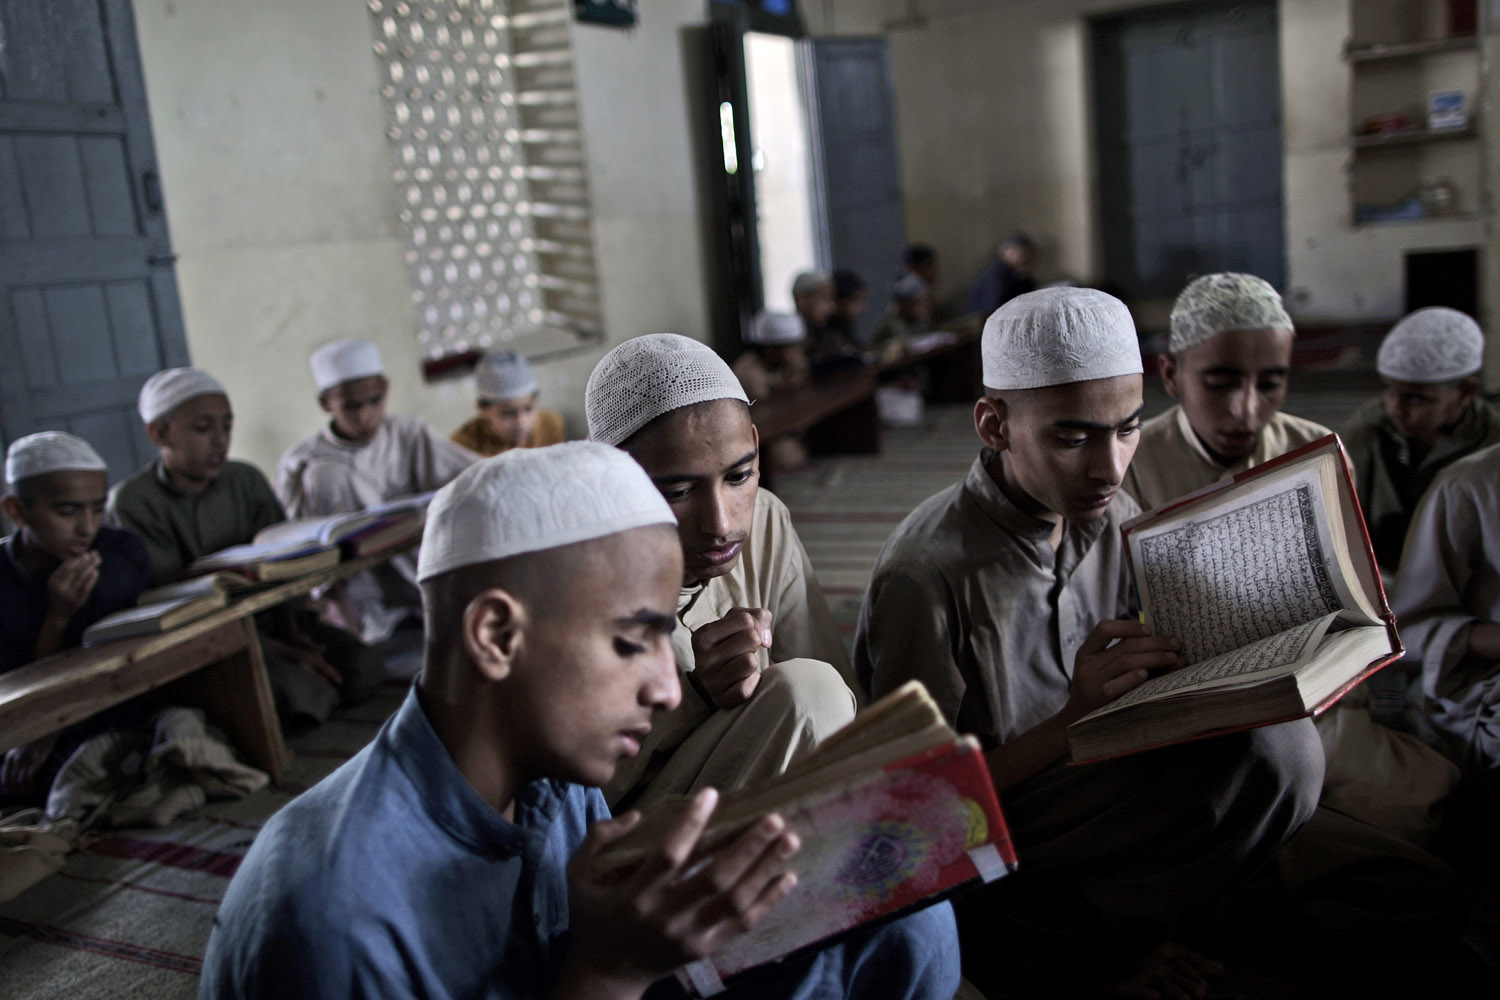 March 26, 2013. Pakistani students of a madrassa, or Islamic school, recite verses of the holy Quran, in Islamabad, Pakistan.